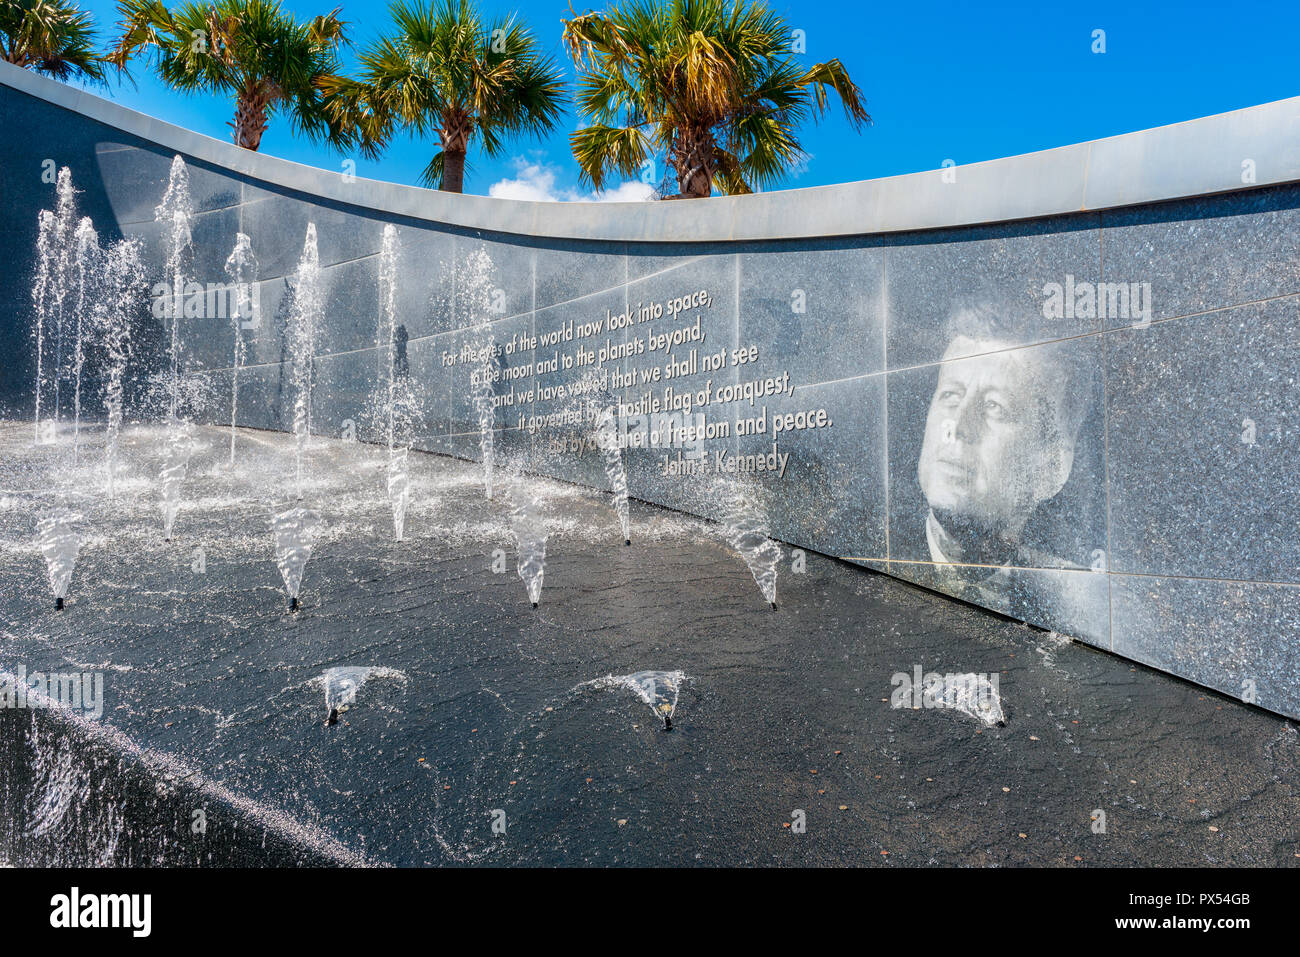 Snippet from 1962 Moon Speech by President John F. Kennedy on wall at Kennedy Space Center Visitor Complex in Cape Canaveral Florida USA Stock Photo